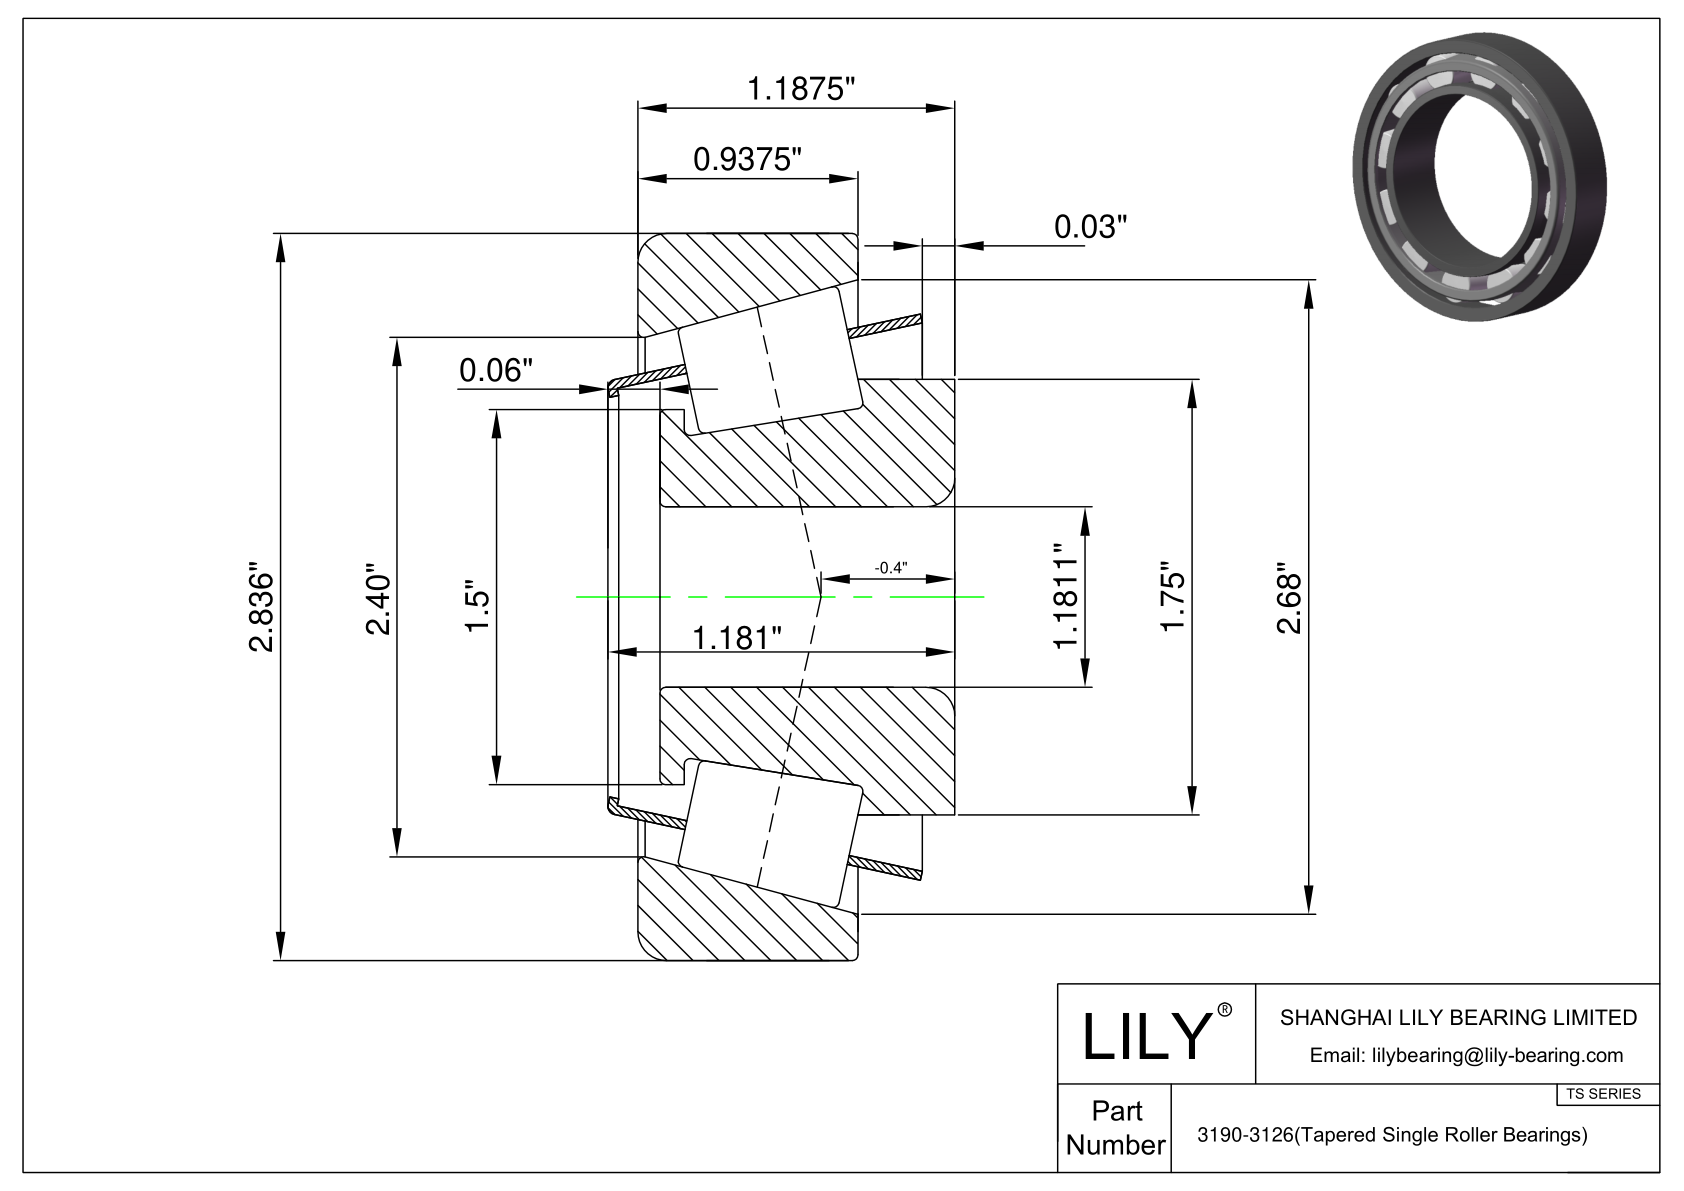 3190-3126 TS (Tapered Single Roller Bearings) (Imperial) cad drawing